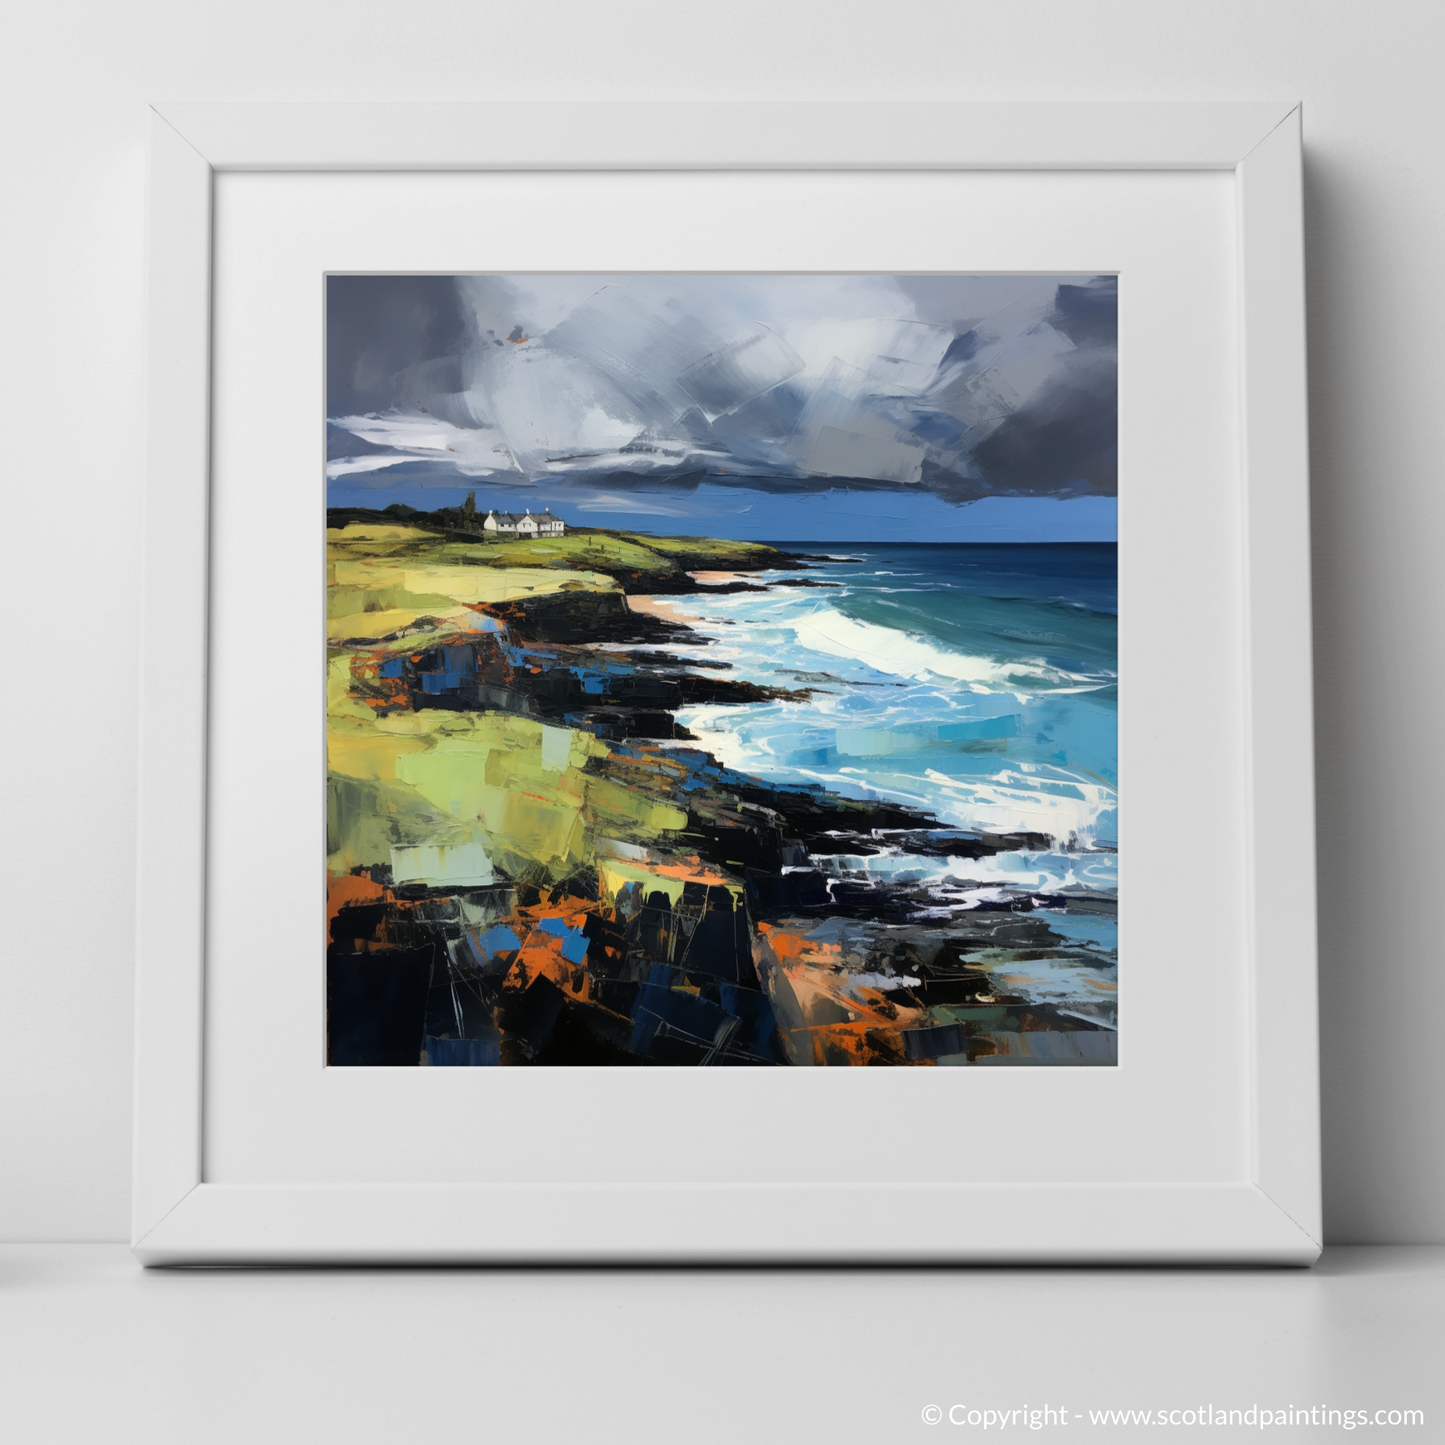 Art Print of Coldingham Bay with a stormy sky with a white frame